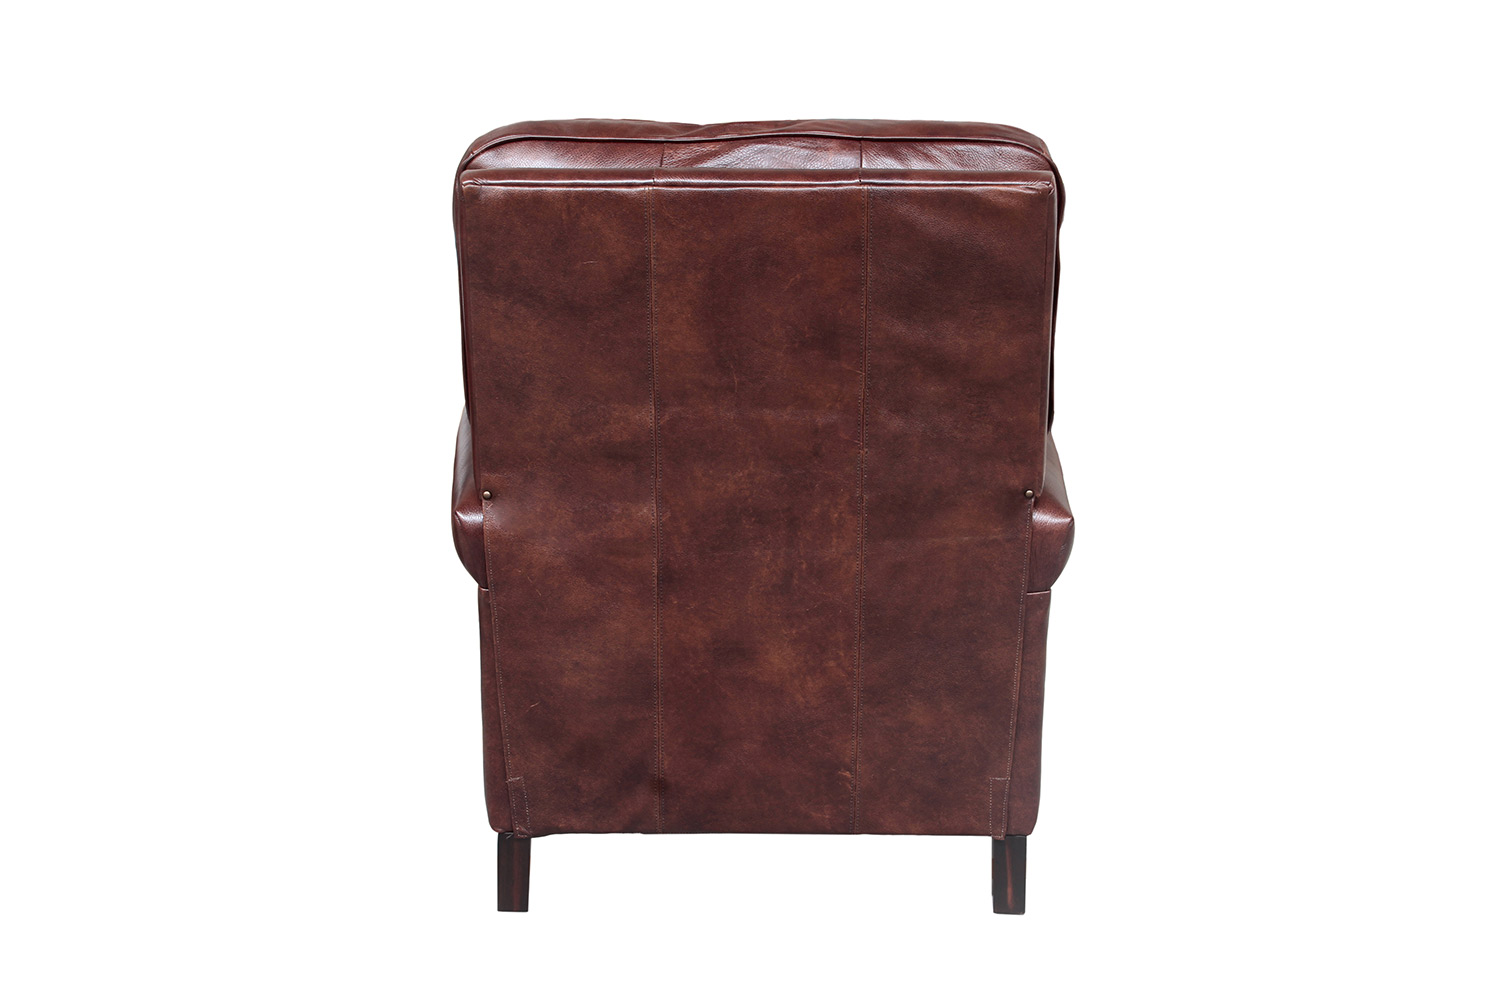 Barcalounger Briarwood Recliner Chair - Wenlock Fudge/All Leather